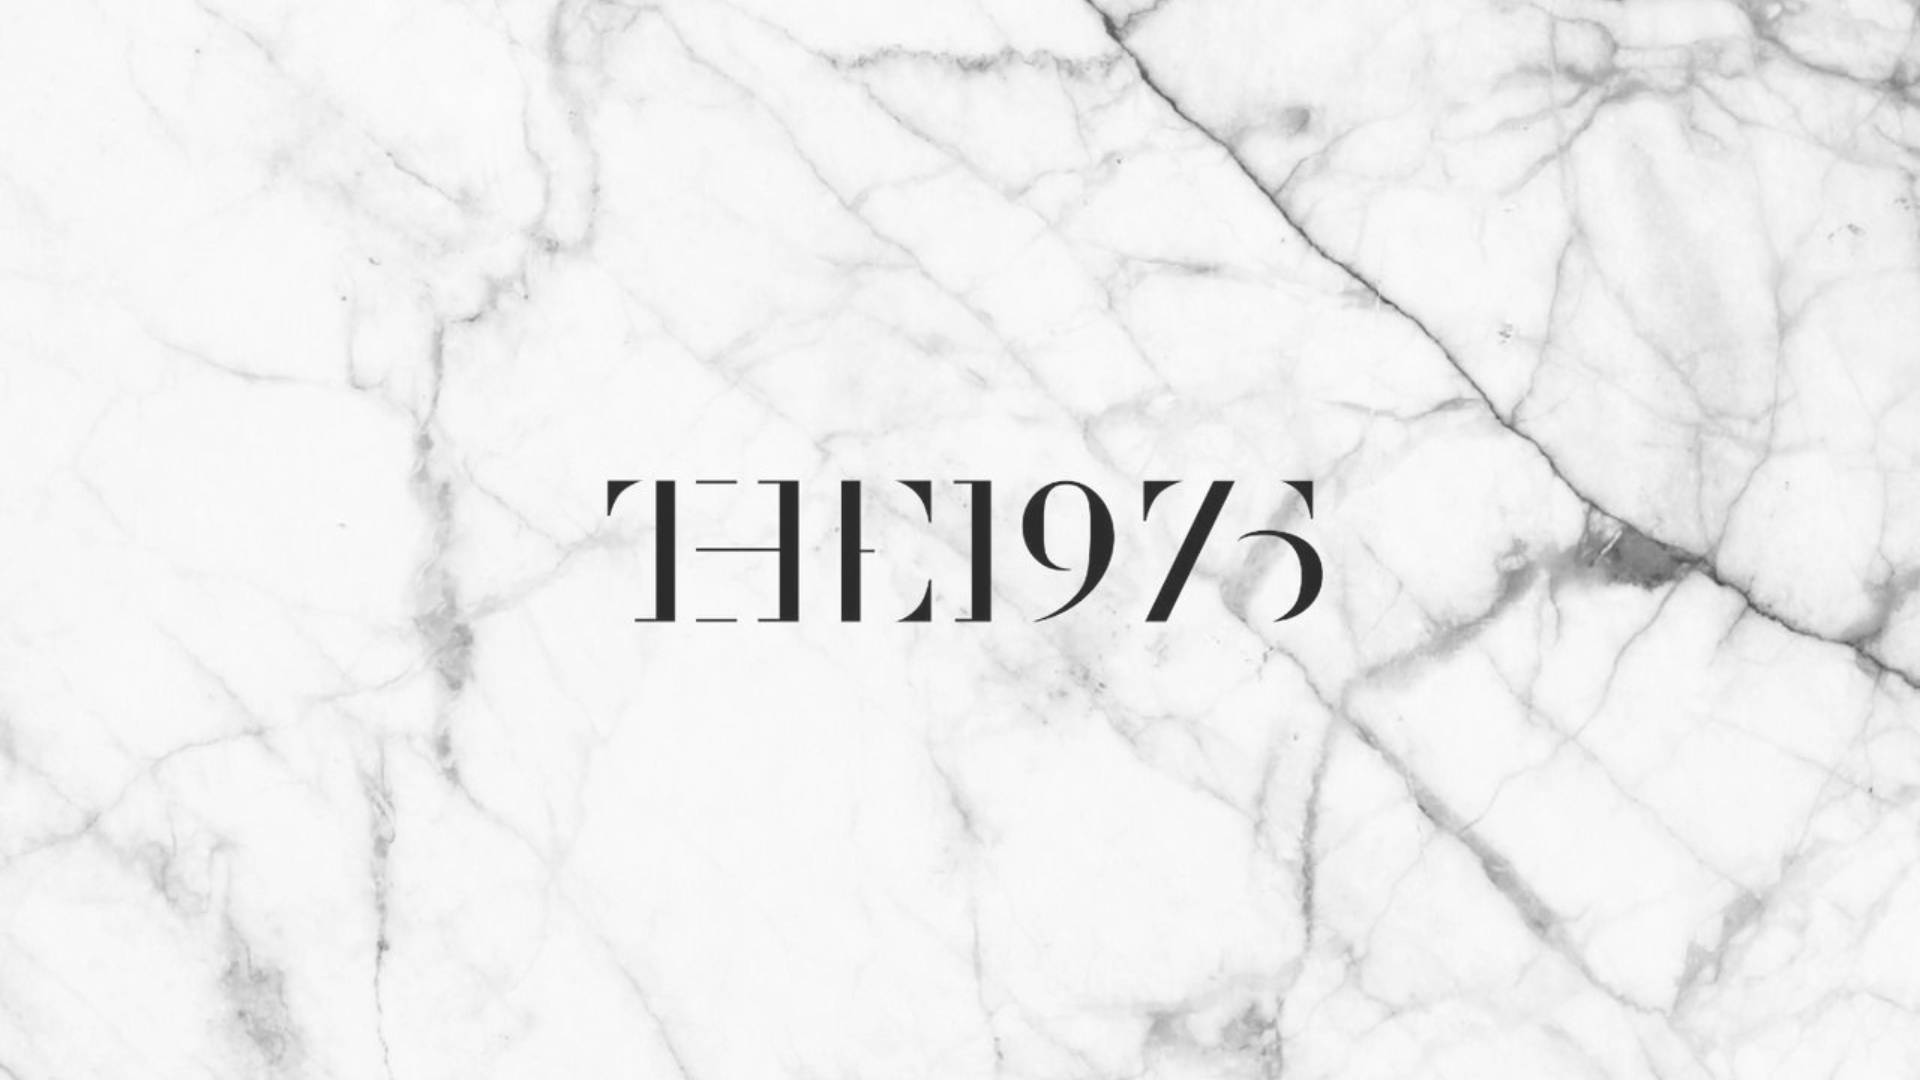 The 1975 On White Marble